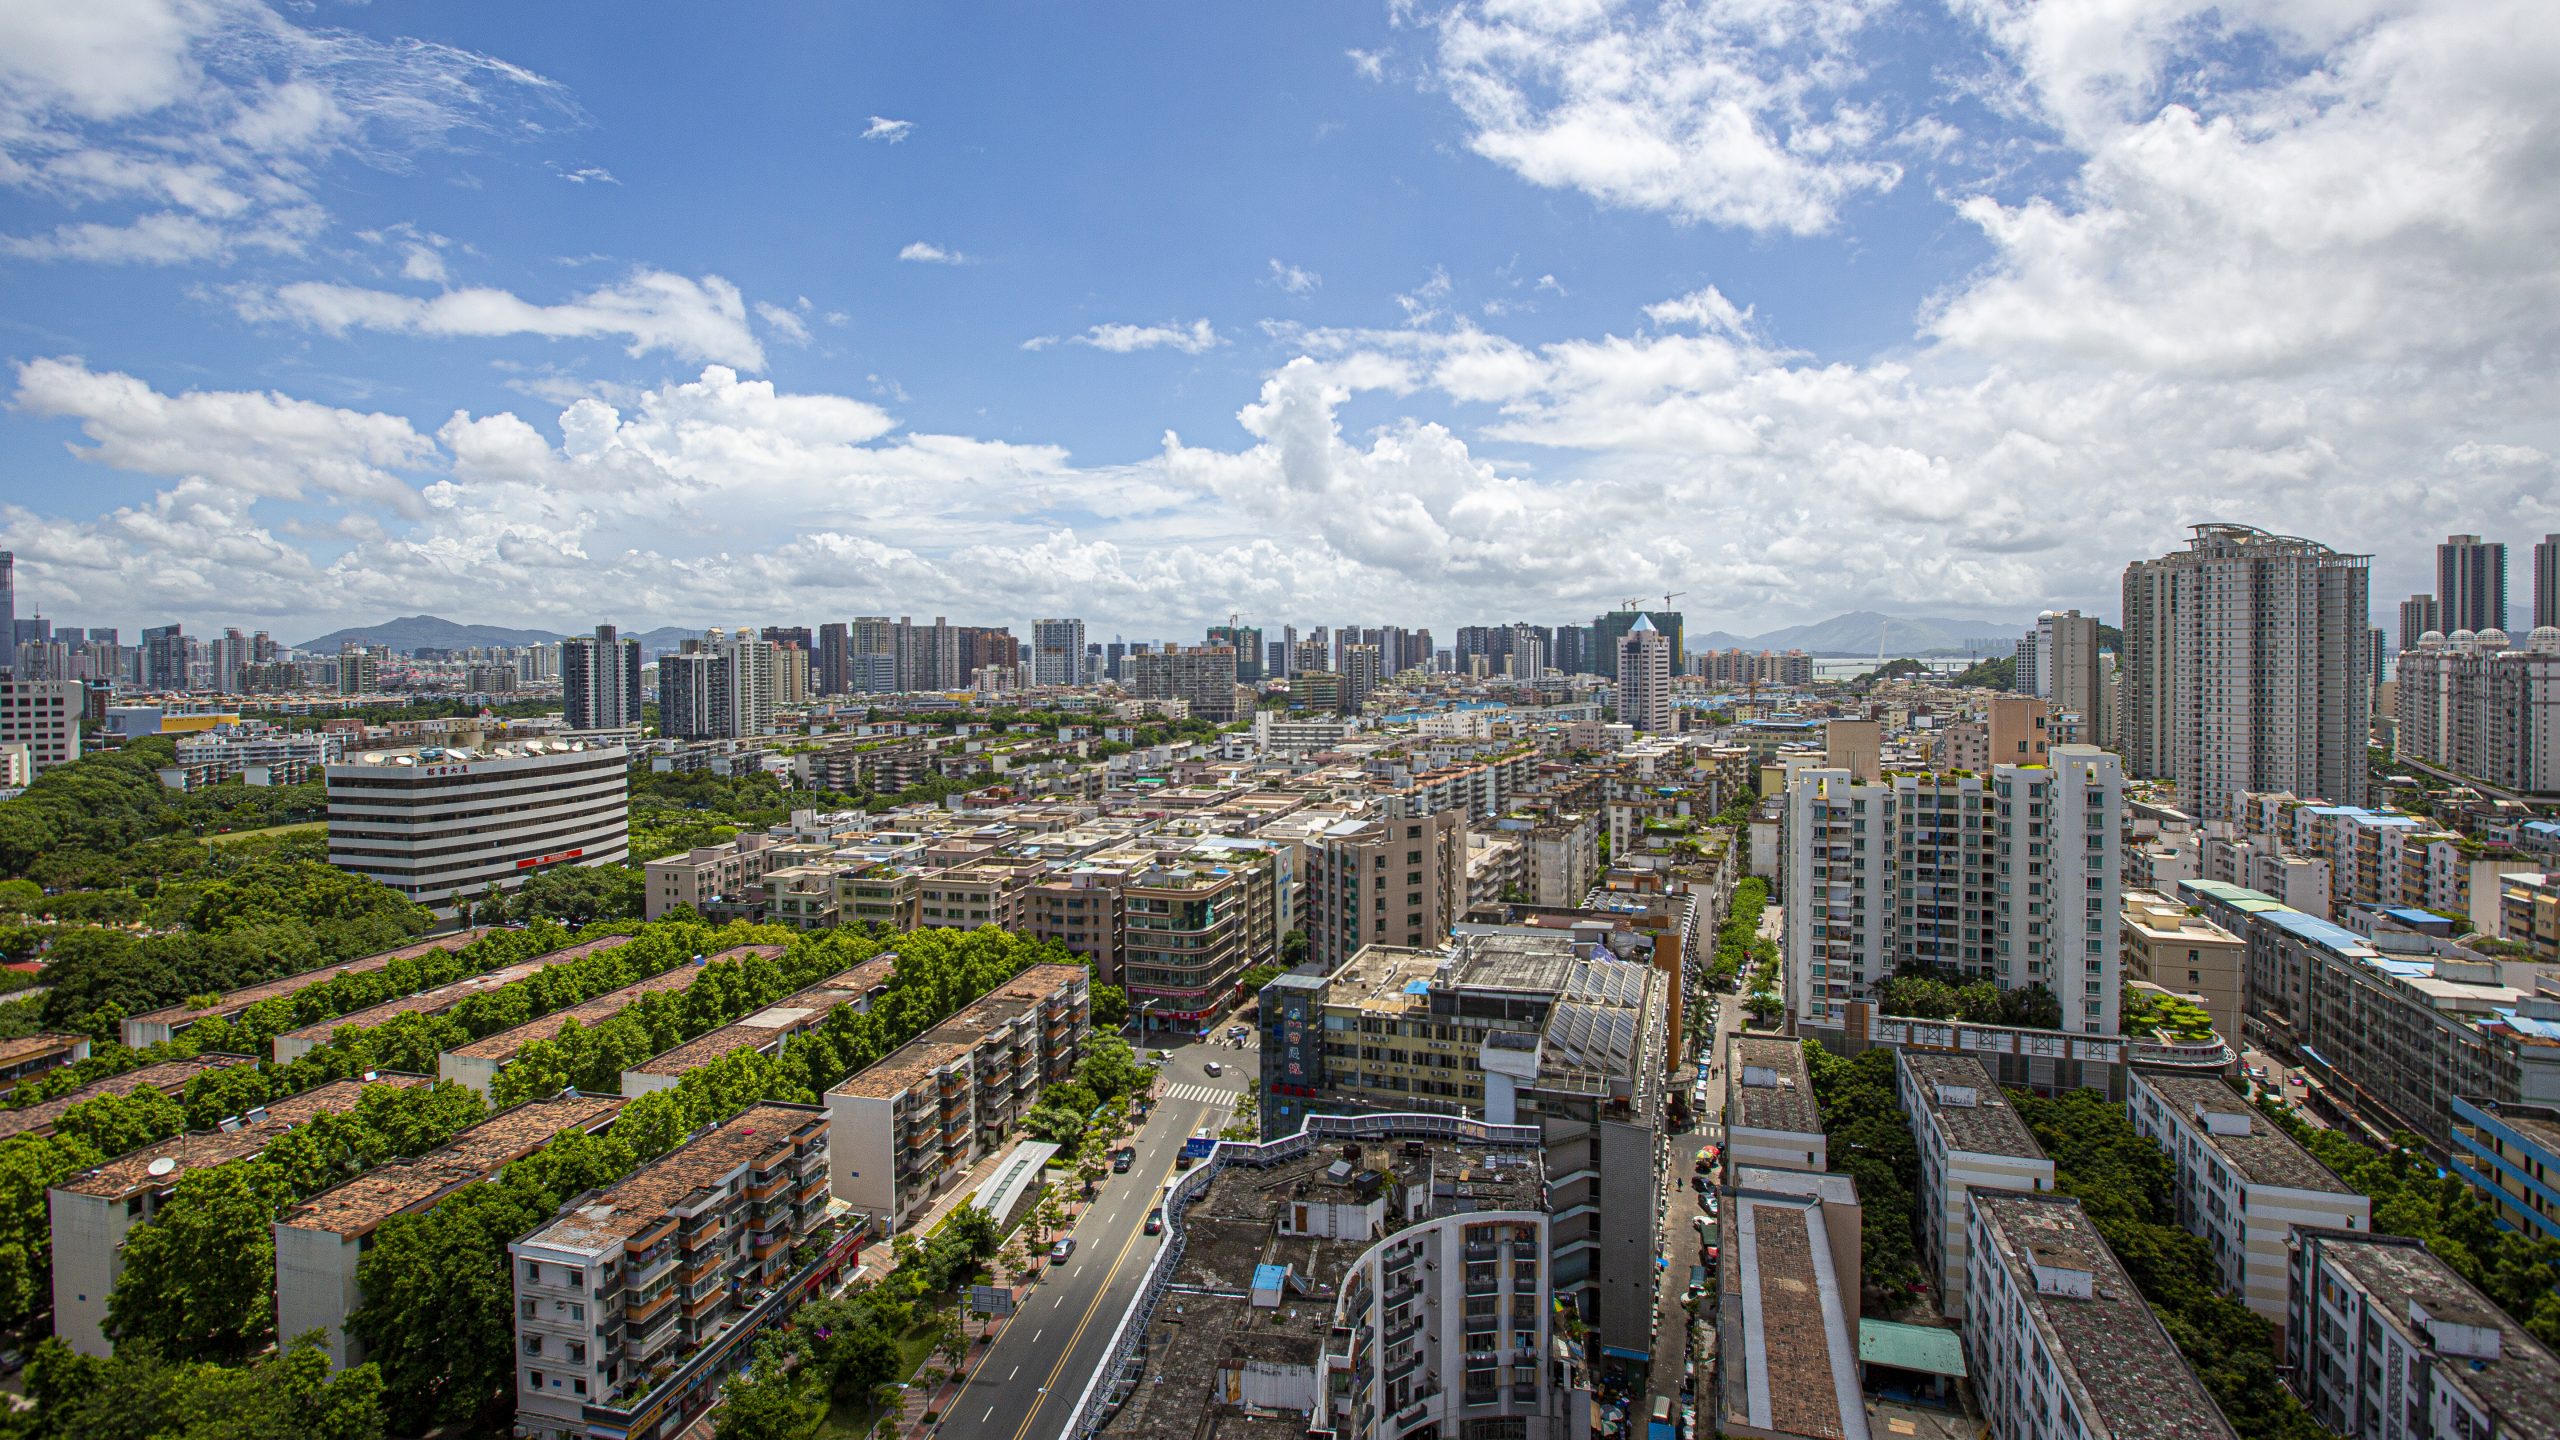 Cityscape of Shenzhen, China, during a sunny afternoon with white clouds, looking over the residential area. Photographer Tuomas Harjumaaskola.